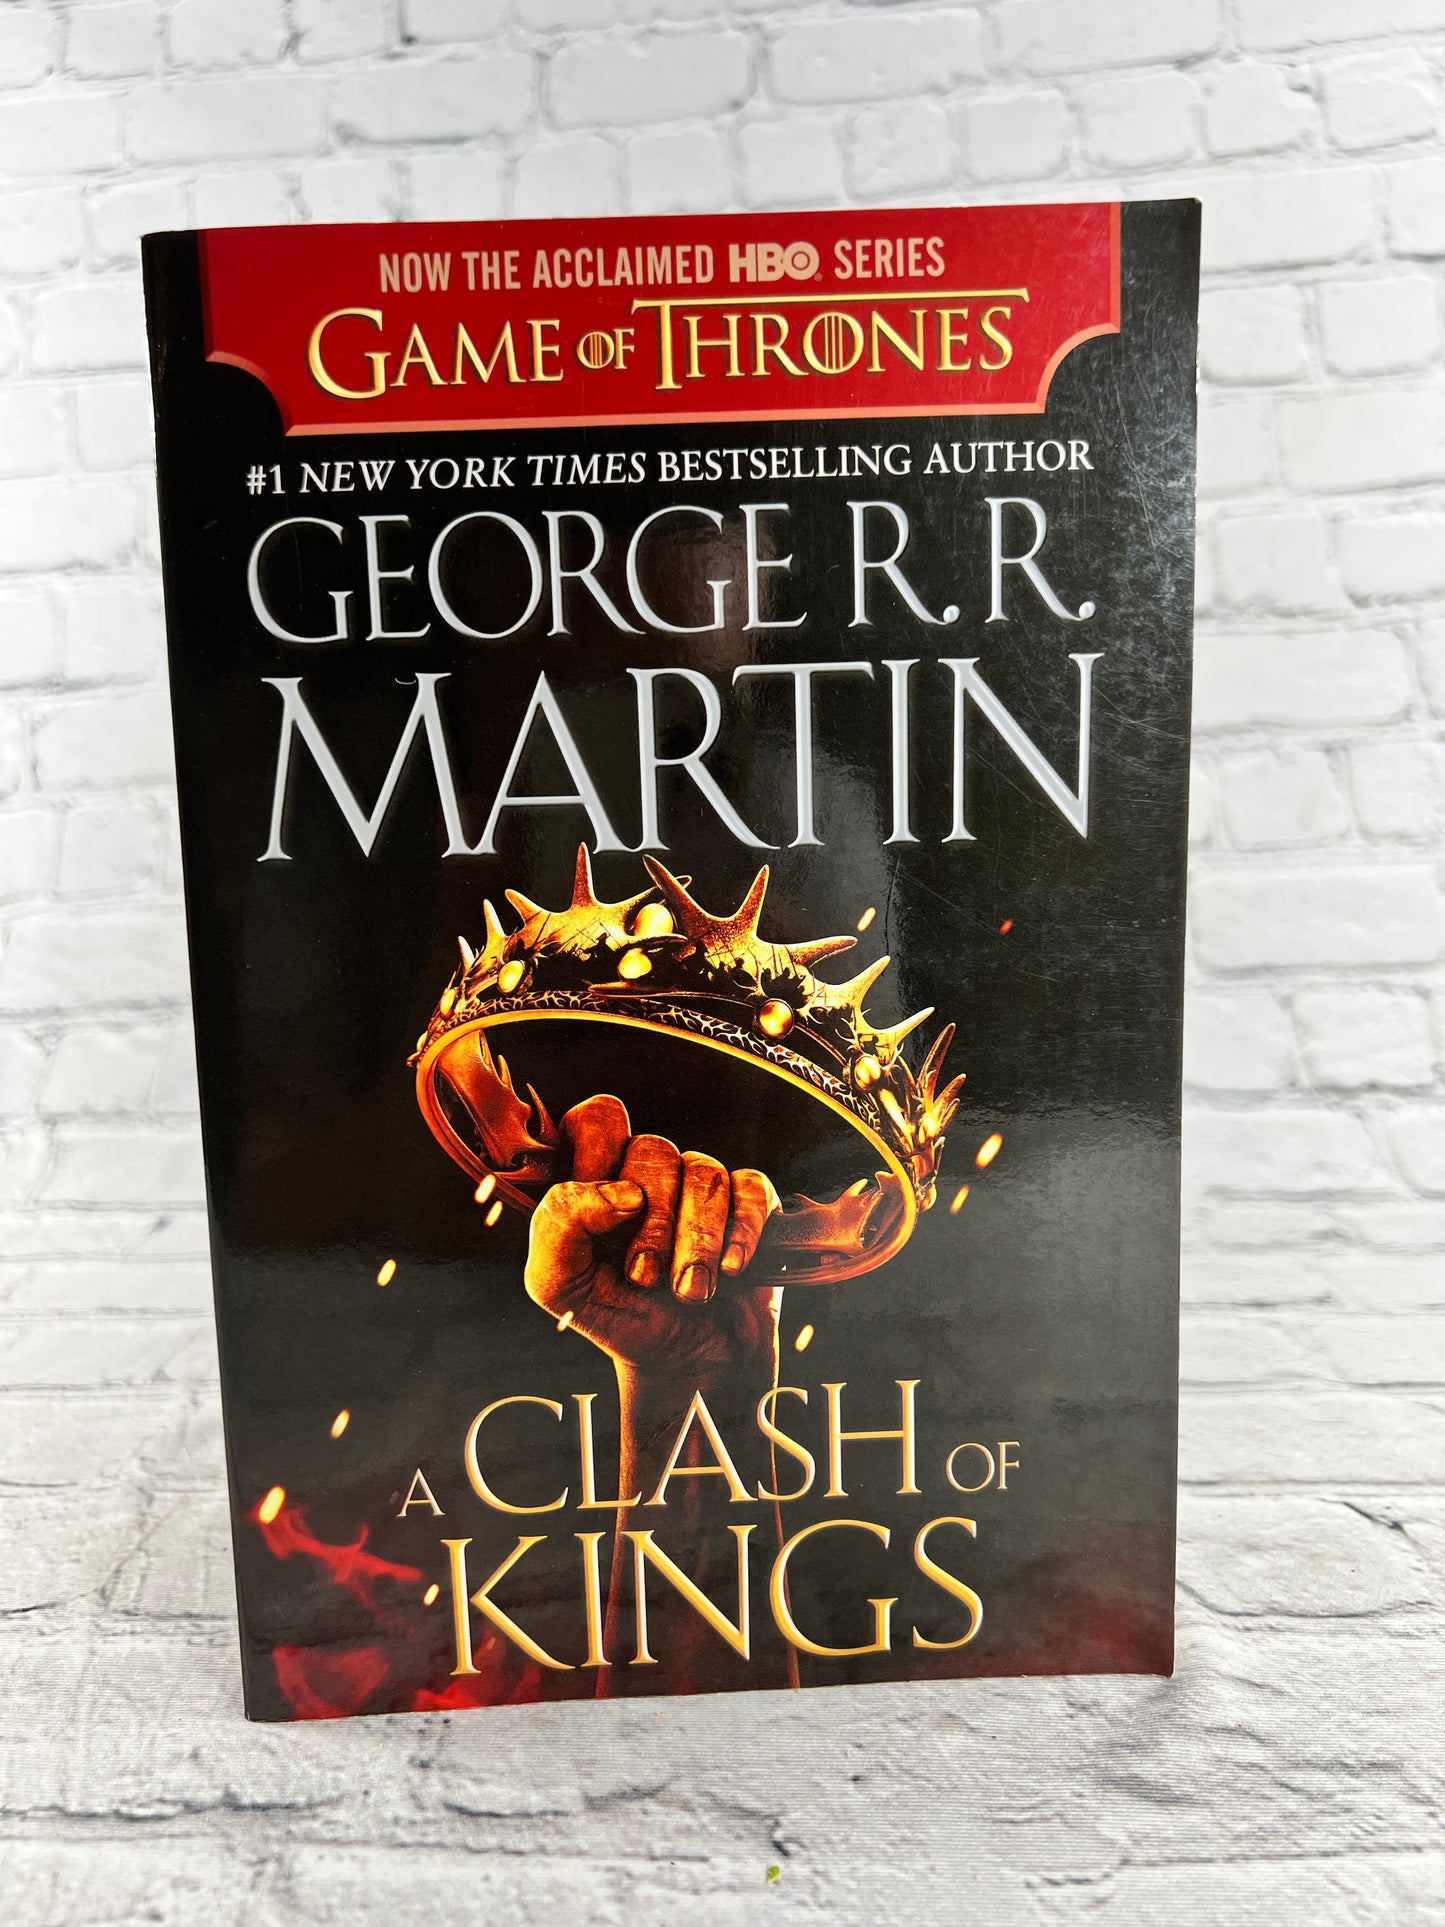 Game of Thrones: A Clash of Kings by George R. Martin [2012]